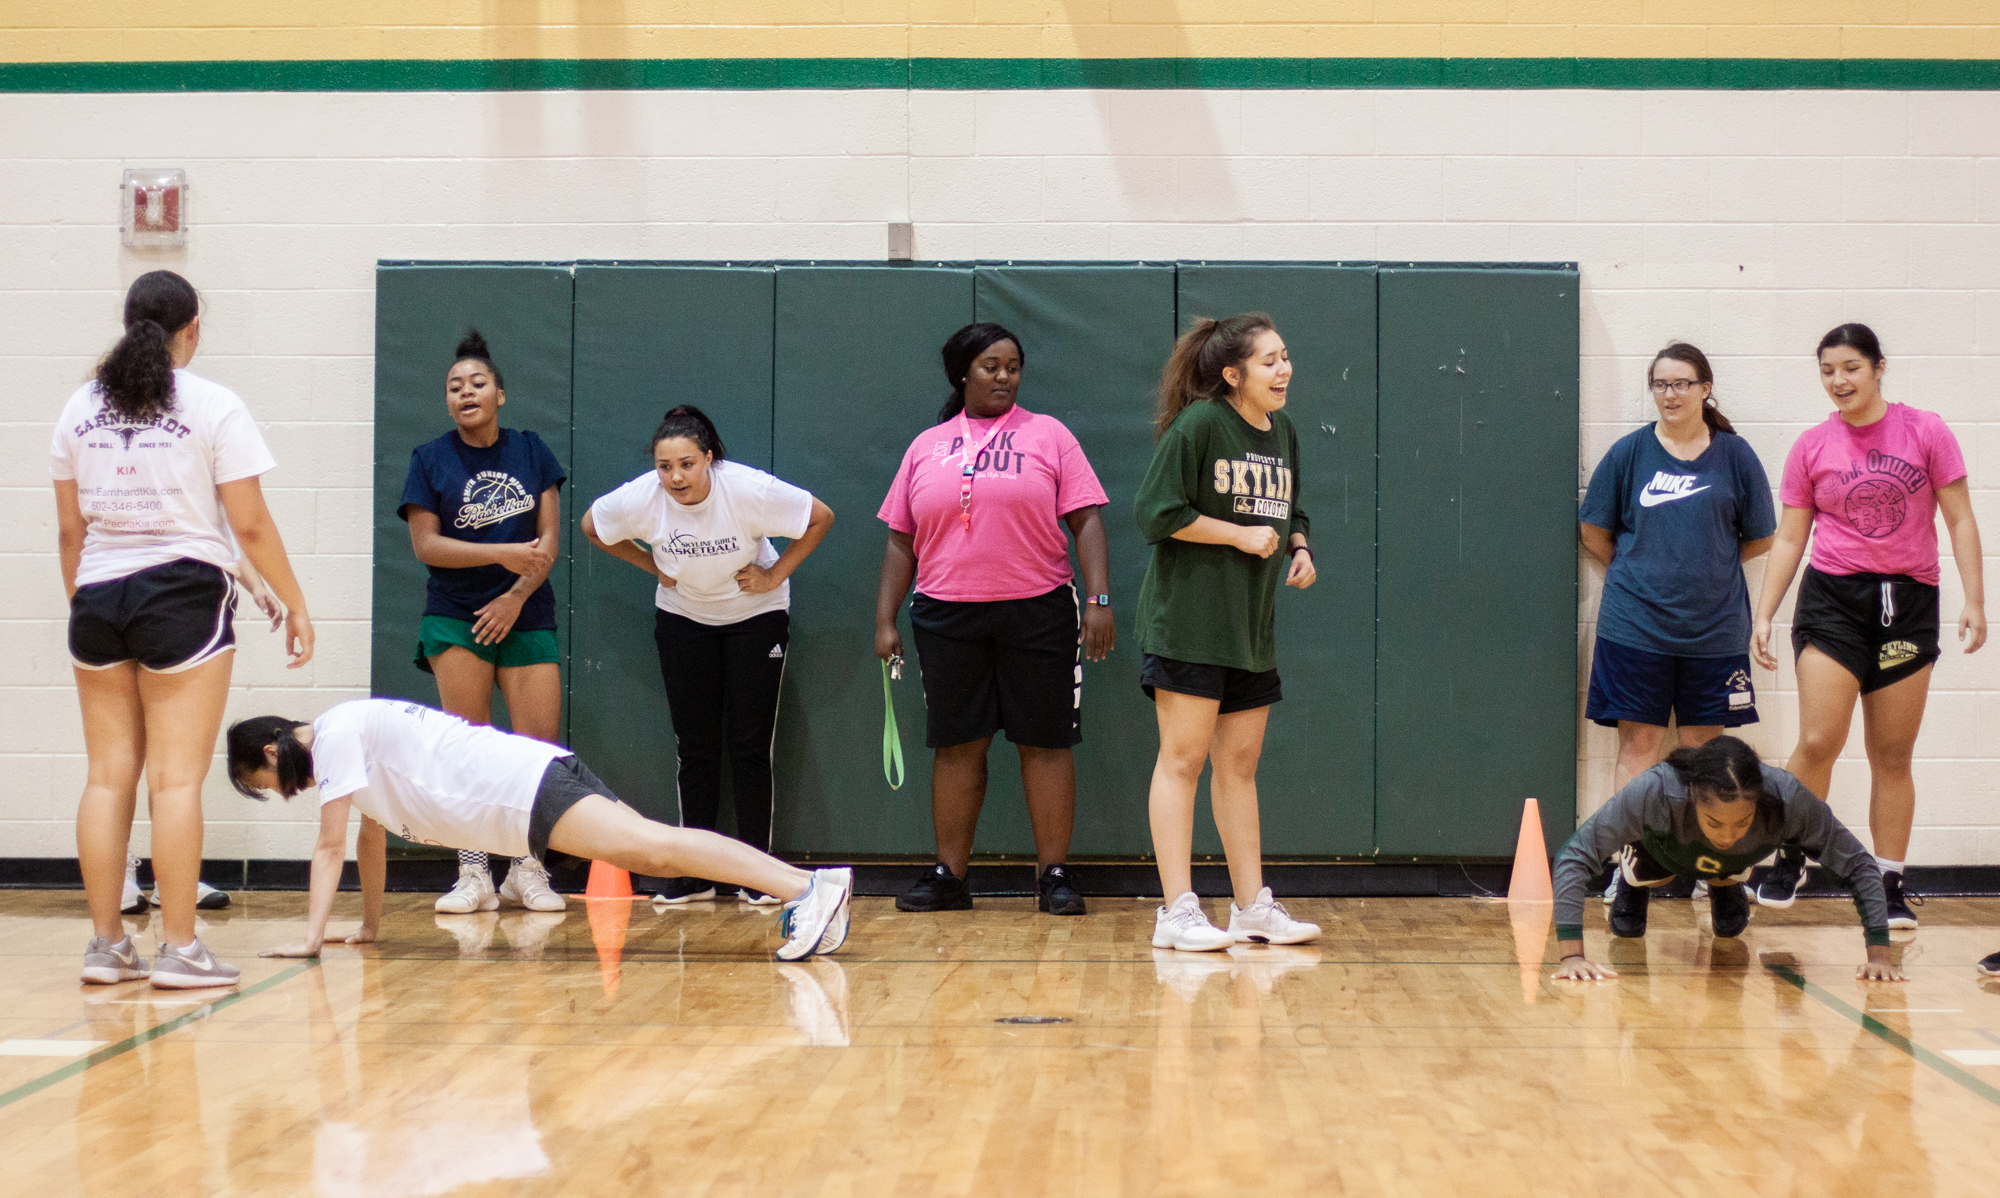  Chiniqua Bright looks on as her students, all members of Skyline’s female varsity basketball team, participate in a relay push-up exercise on Oct. 3, 2018. Skyline is a Title 1 high school, meaning at least 40 percent of the student body comes from 